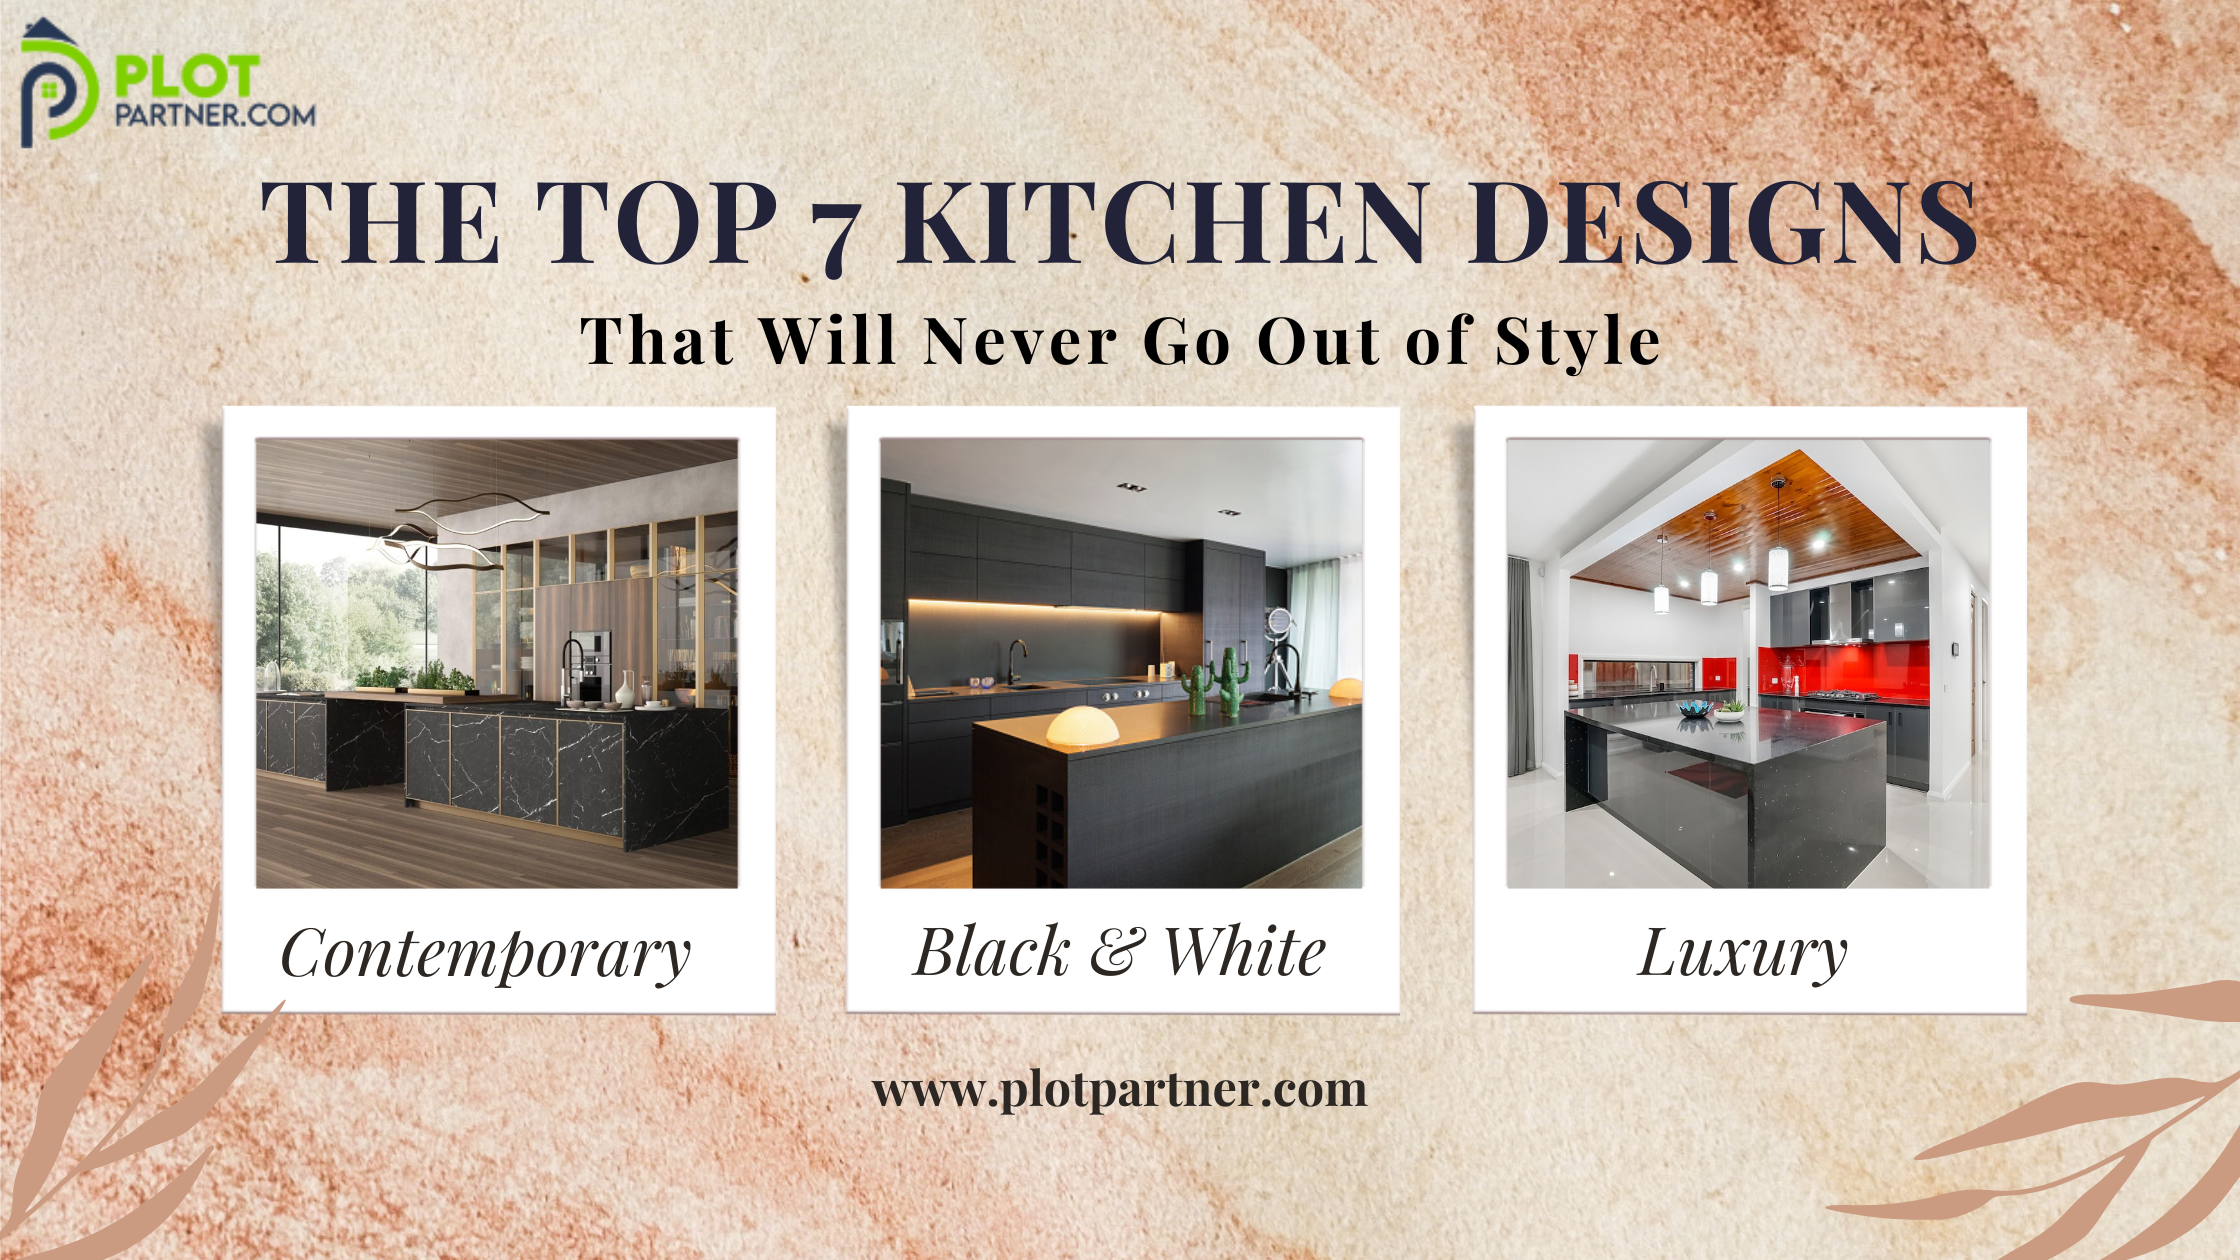 The Top 7 Kitchen Design Ideas That Will Never Go Out of Style